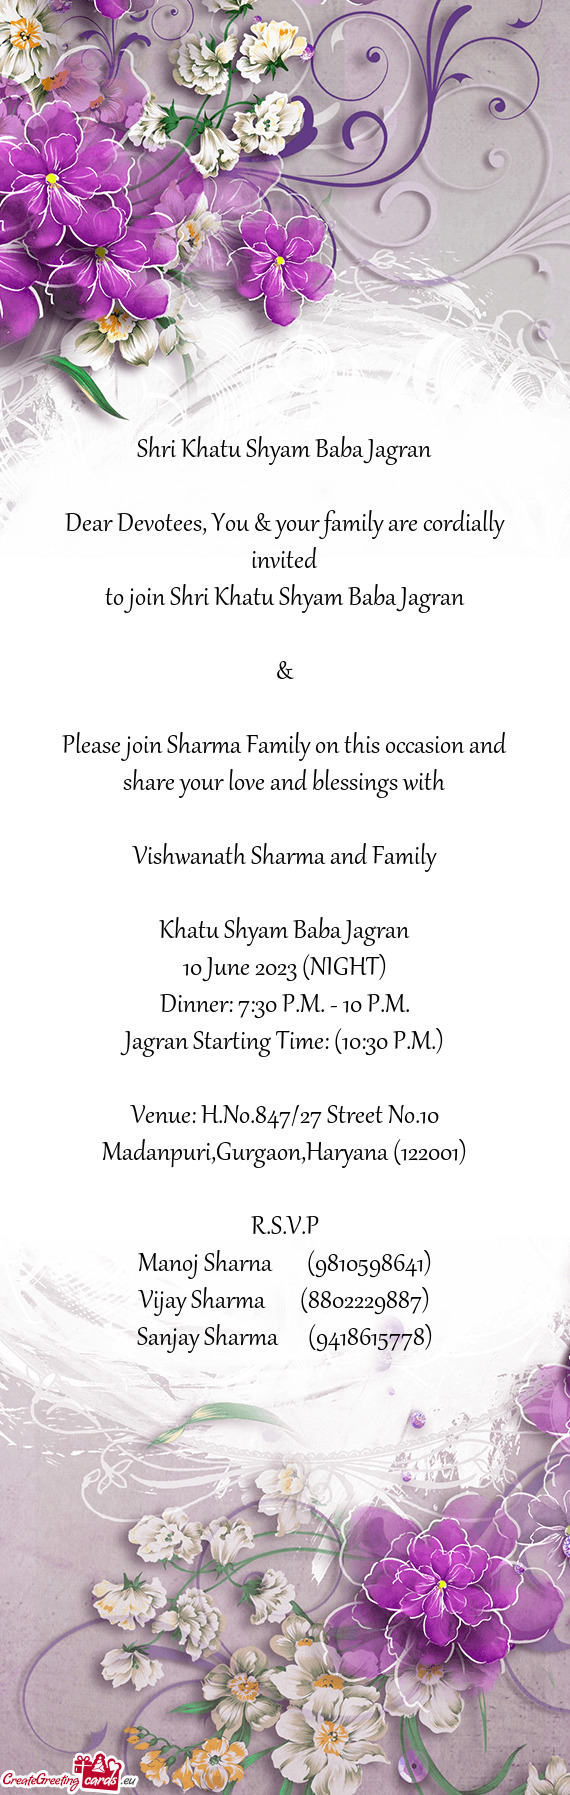 Dear Devotees, You & your family are cordially invited